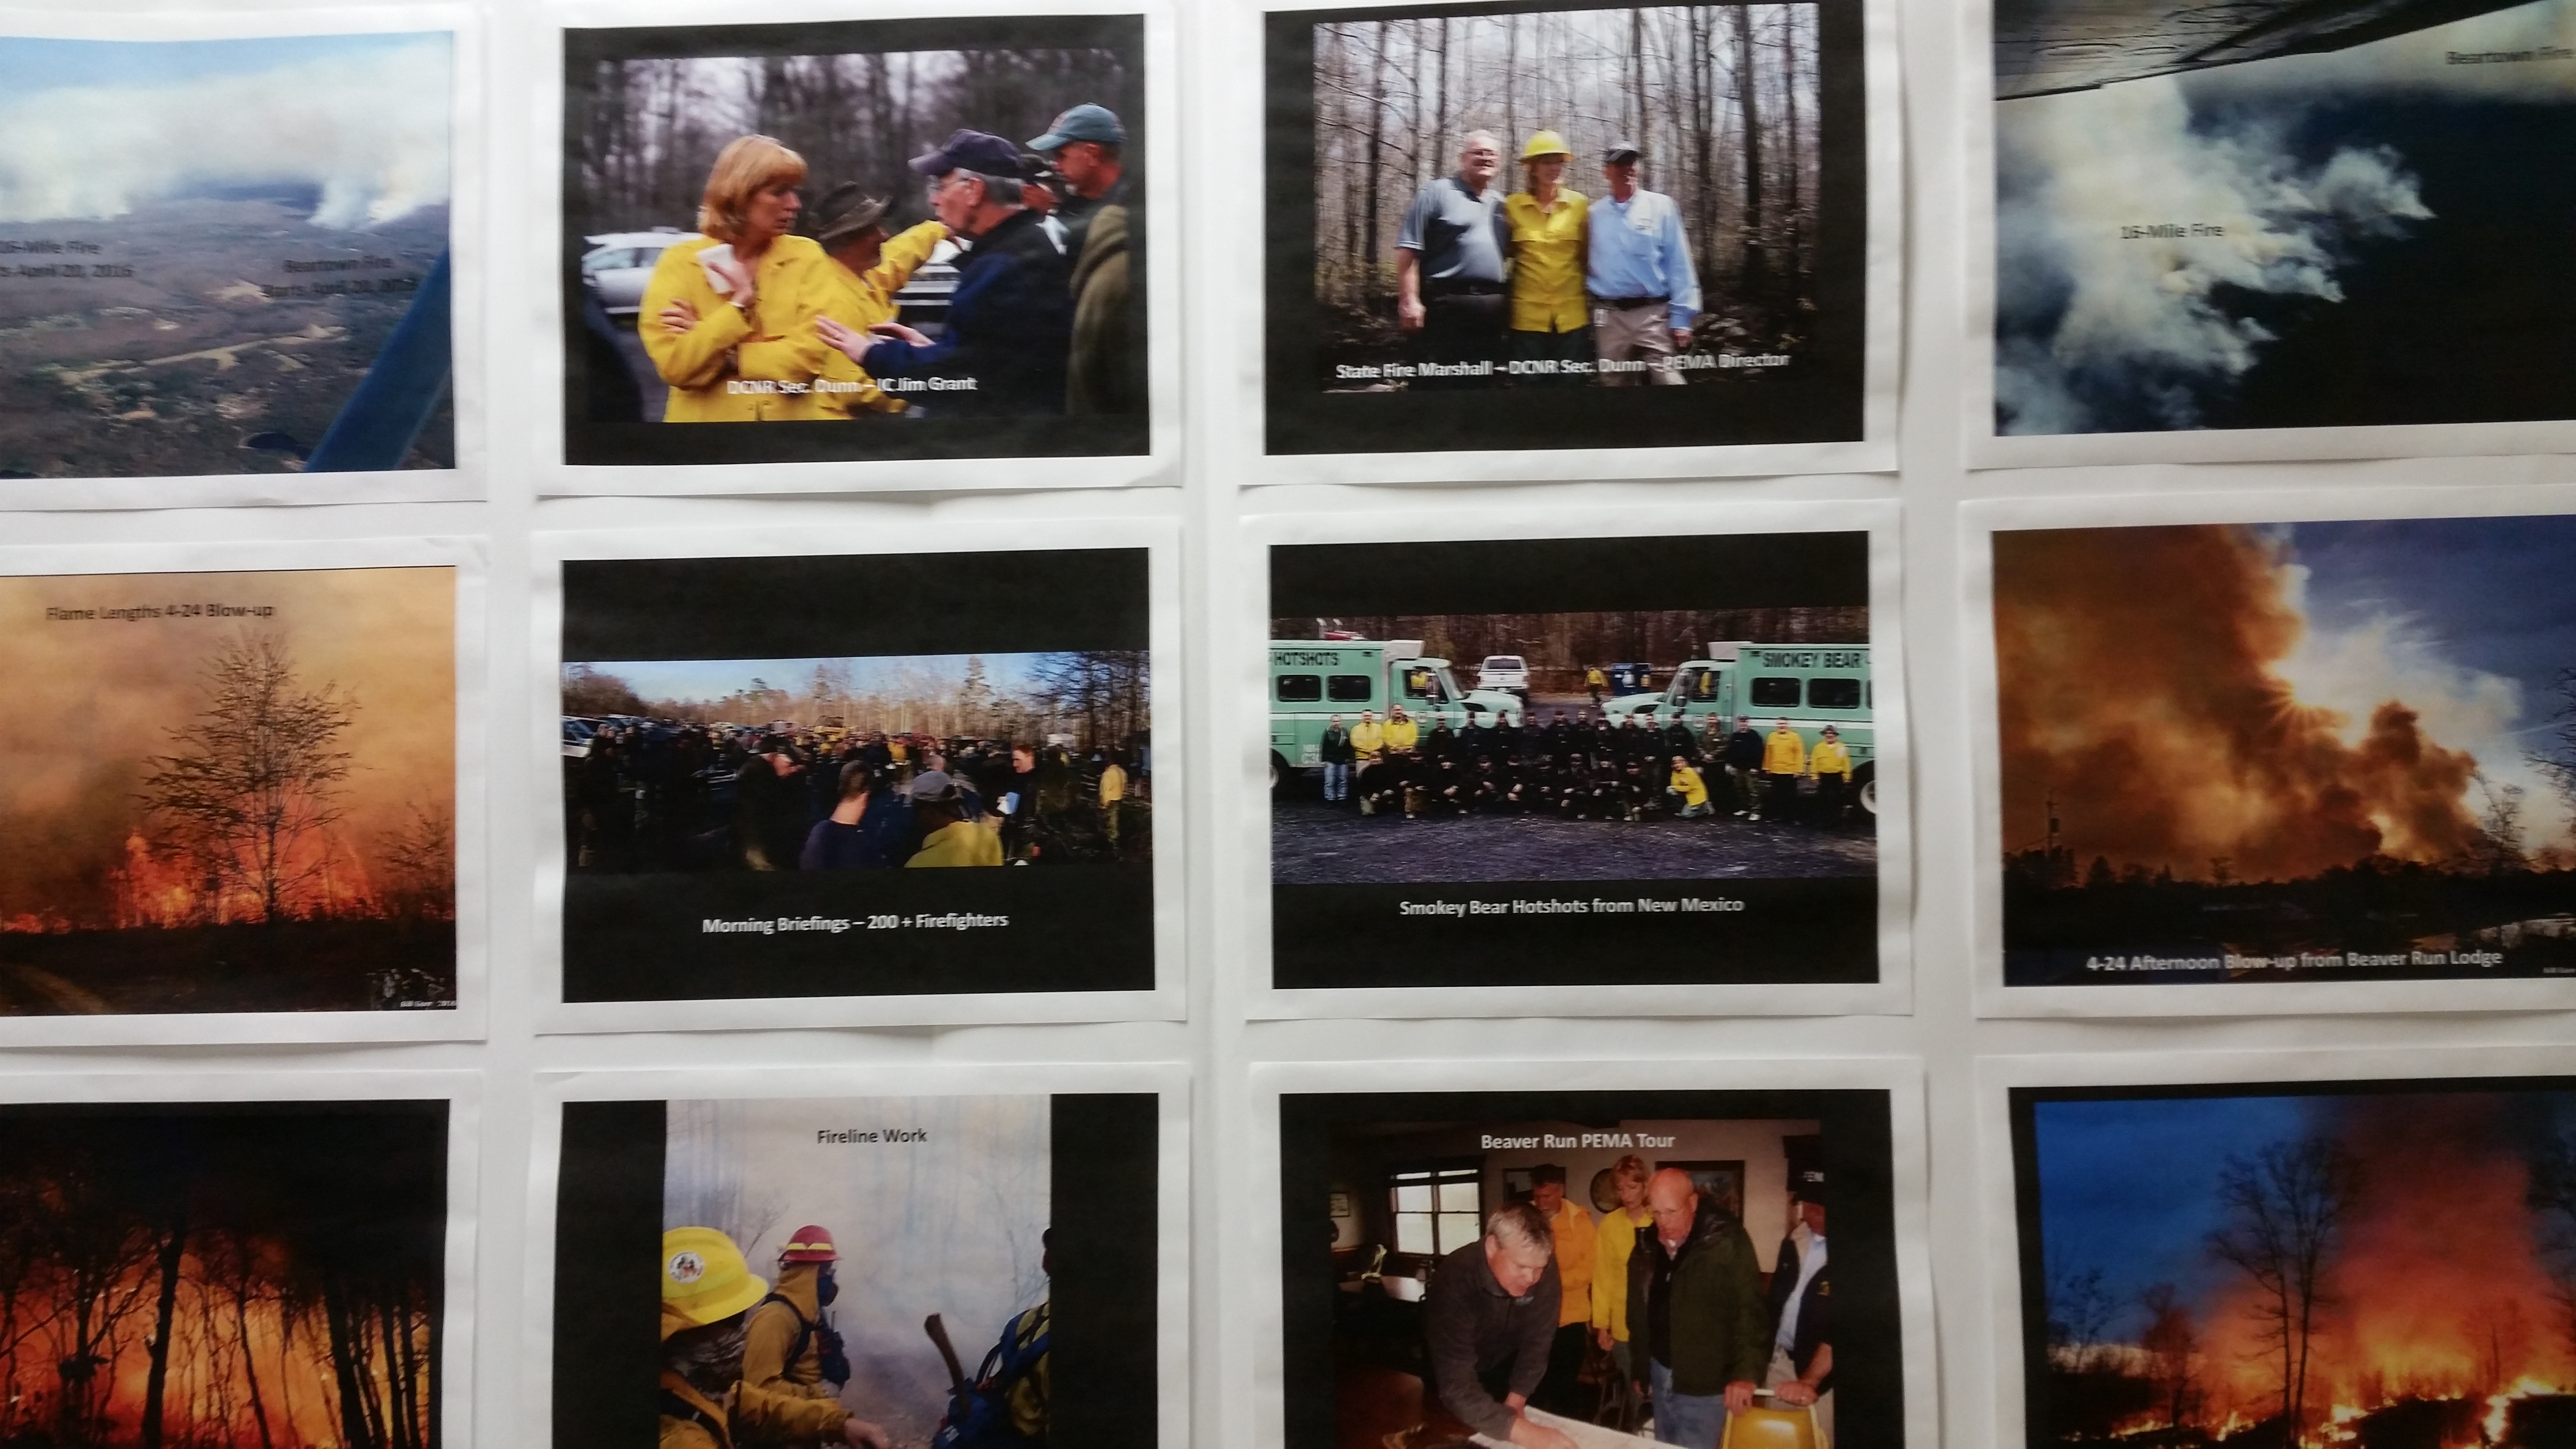 A photo-board displays scenes from the 16 Mile Fire which burned in Barrett Township, Pennsylvania April 20-25. The incident was one of the worst fires the state has experienced in 25 years. Local Forest Fire Wardens heard a presentation on the fire at the Forest Fire Wardens Training Banquet Tuesday. The event was held to honor the work of the fire wardens and to prepare for the upcoming 2017 wildfire season (Photo by Kimberly Finnigan)